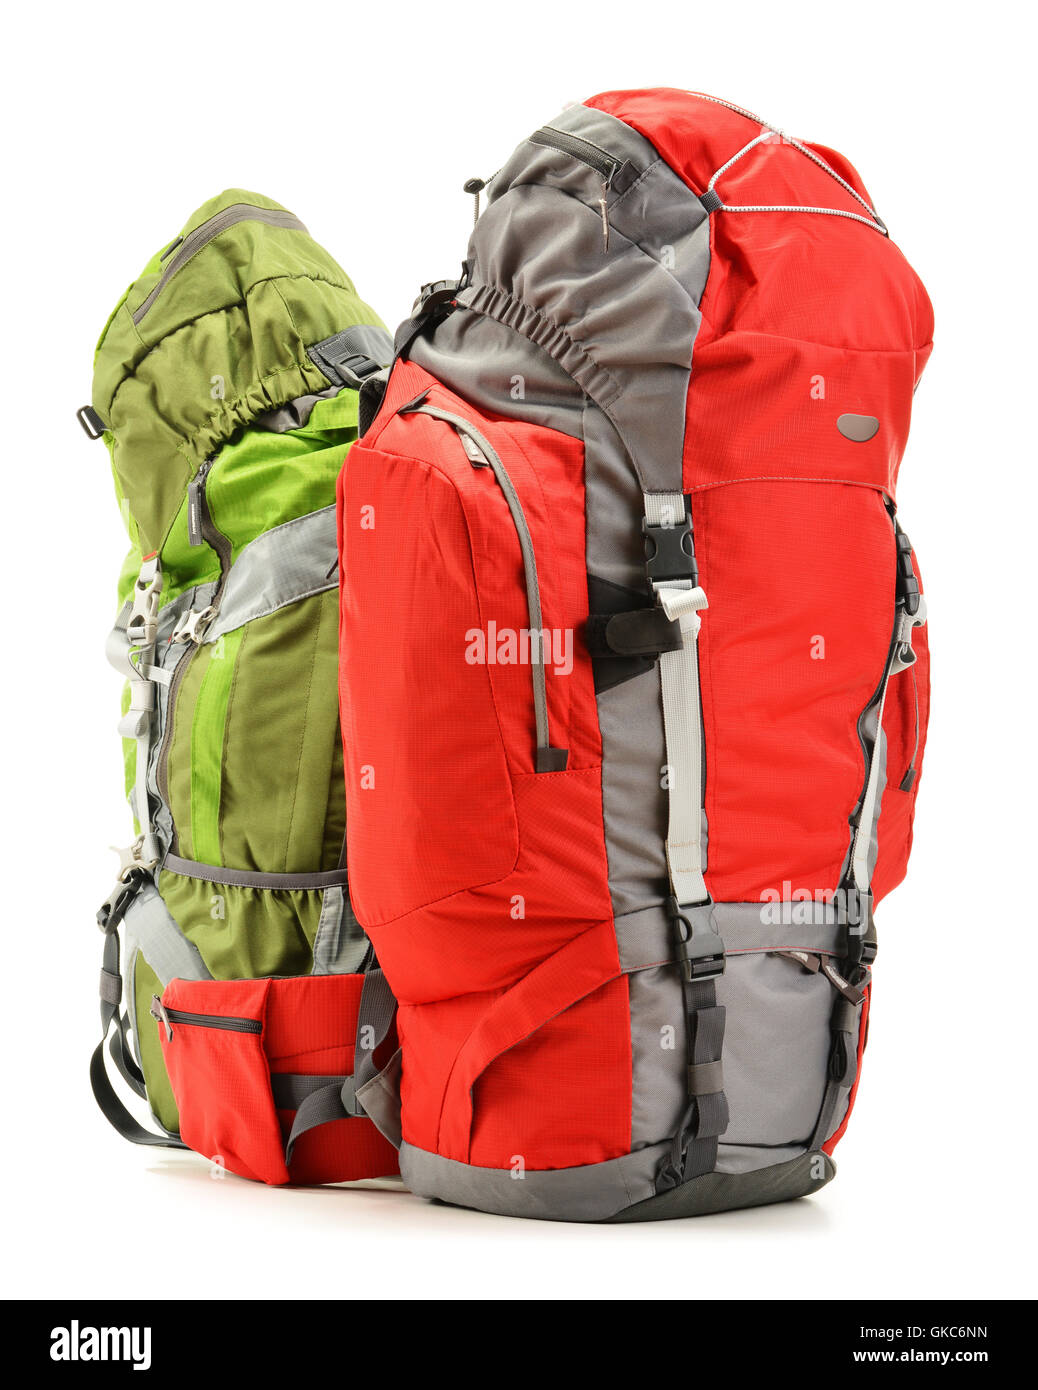 travel tourism backpack Stock Photo